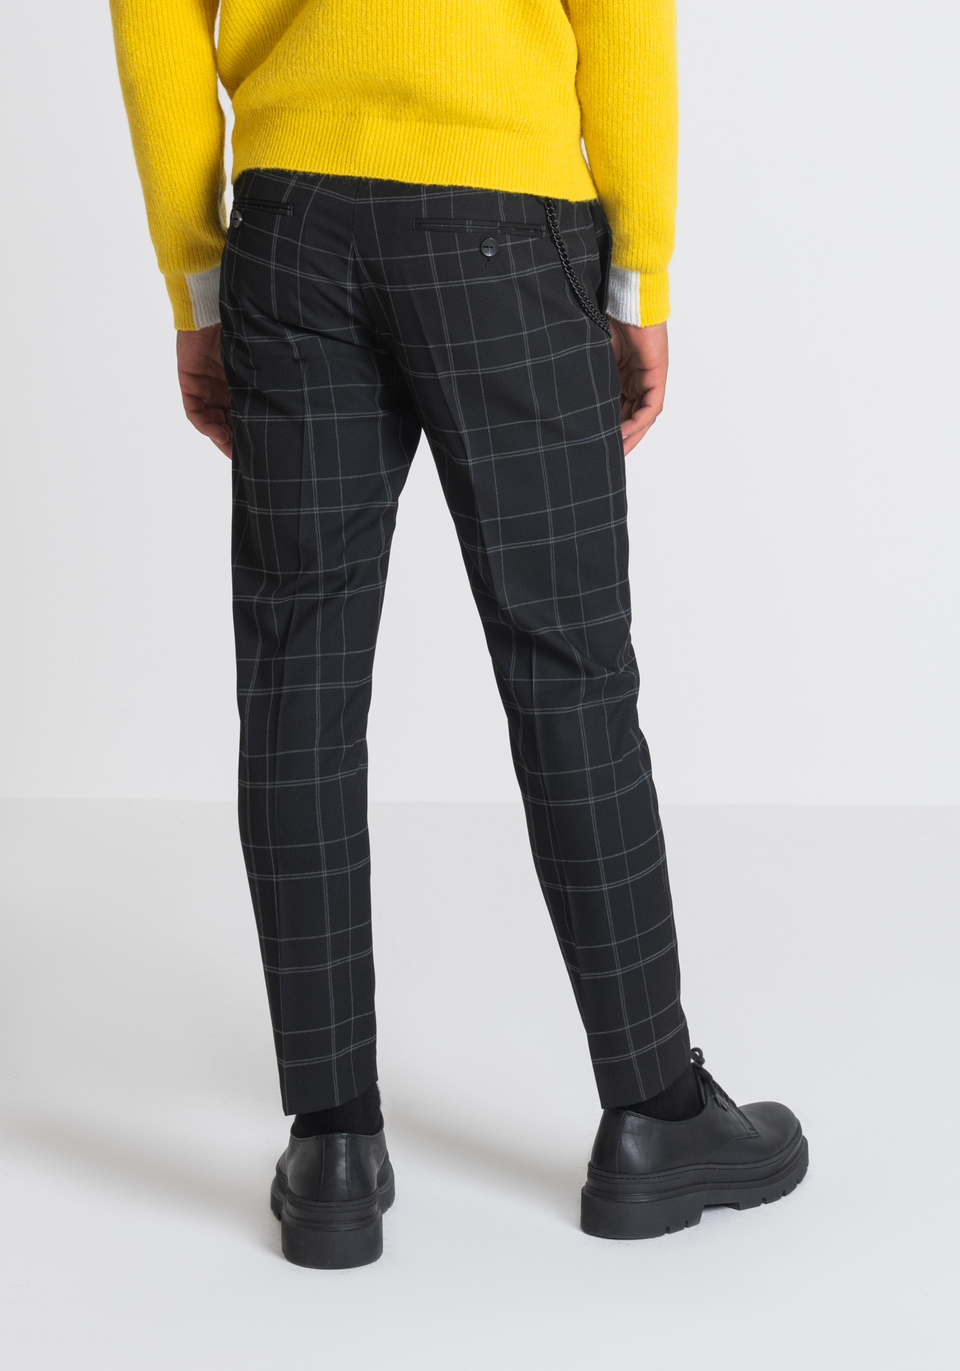 “DAVID” CARROT-FIT TROUSERS IN SOFT STRETCH FABRIC - Antony Morato Online Shop